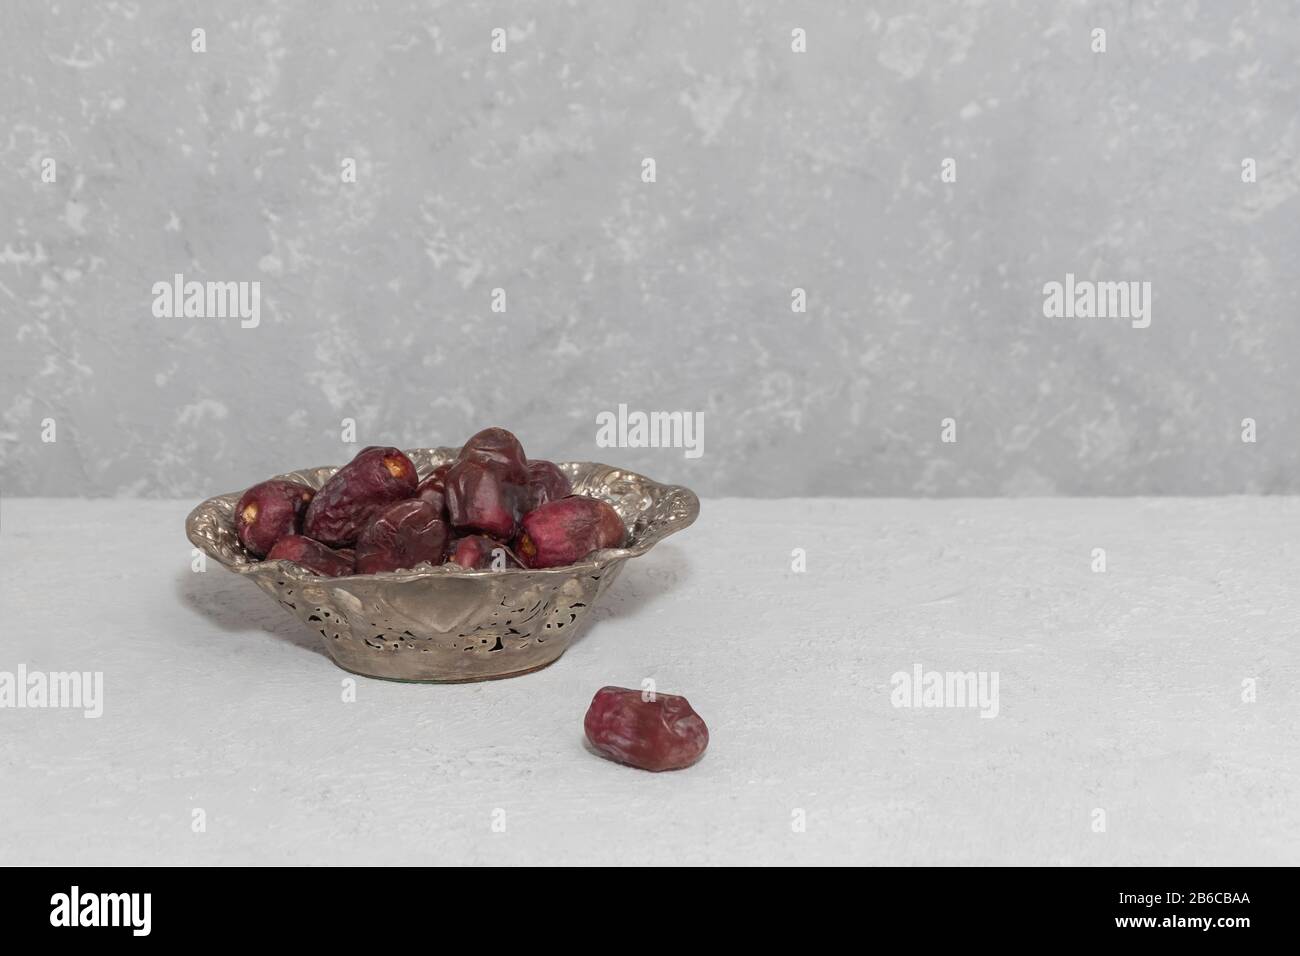 Dry dates in metalic plate on neutral background, copy space. Ramadan fasting concept Stock Photo